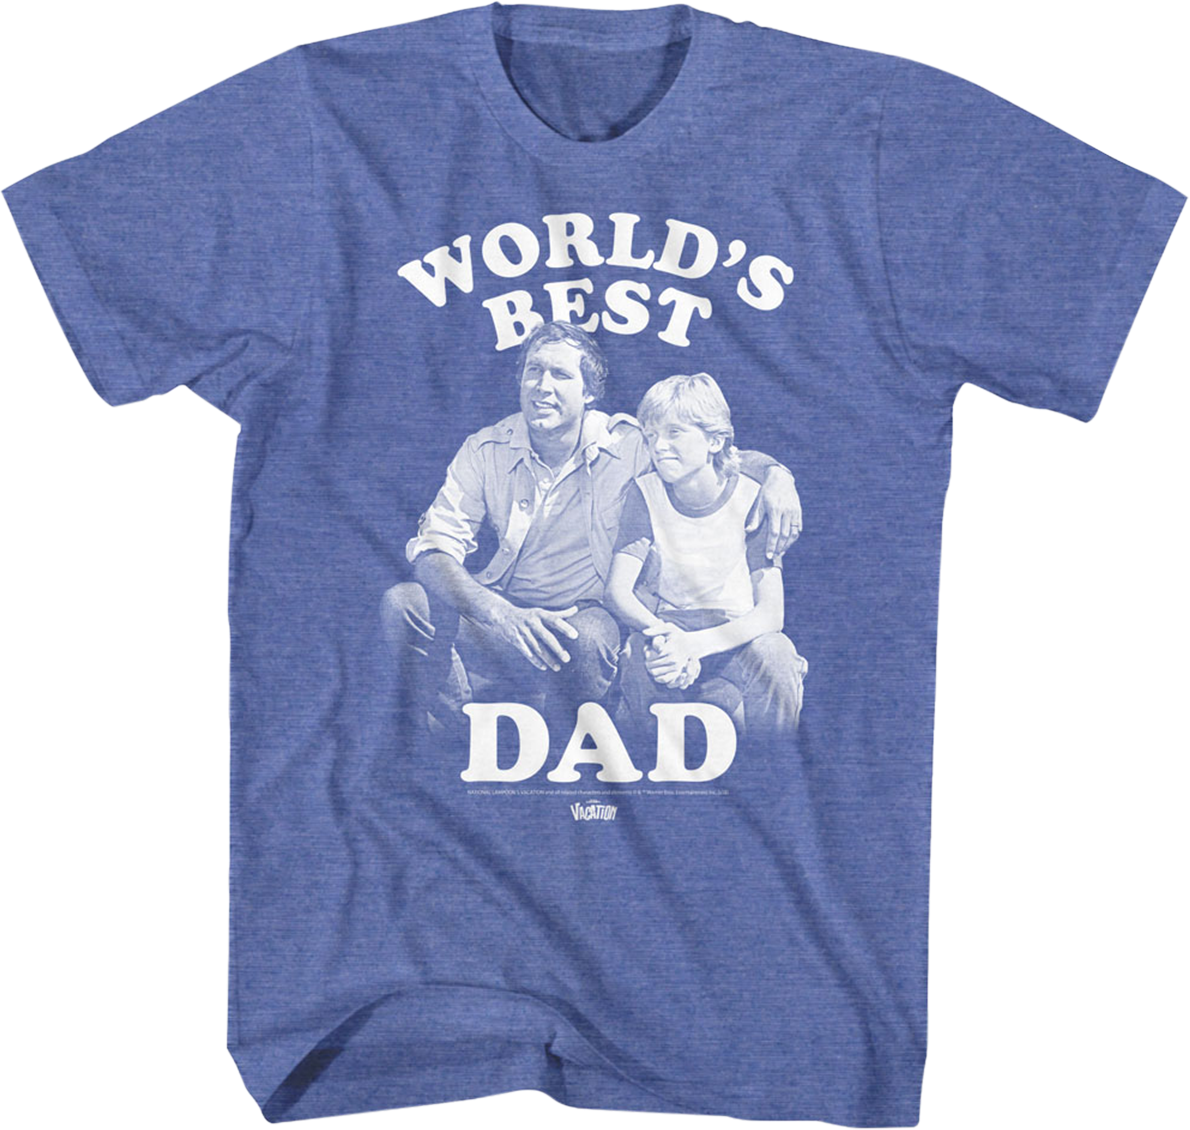 World's Best Dad National Lampoon's Vacation T-Shirt